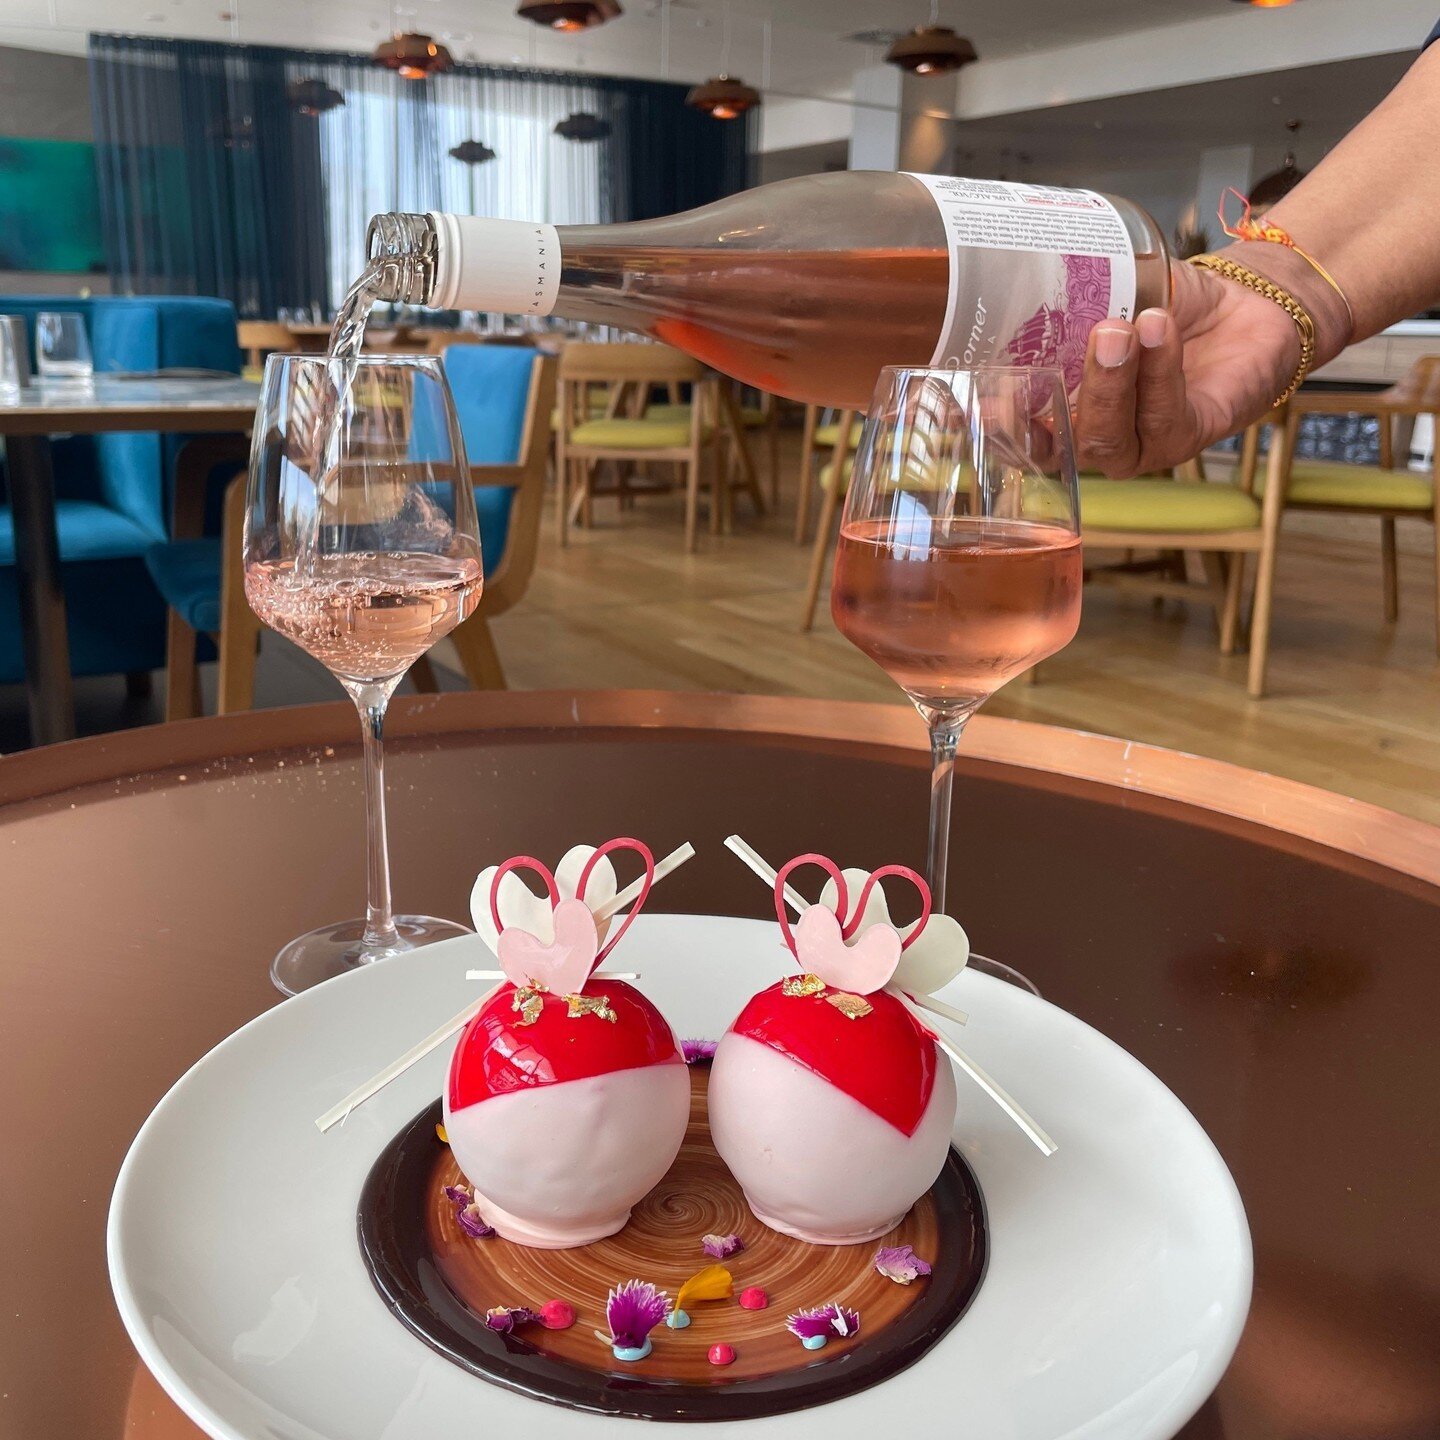 Make this Valentine's Day unforgettable with our romantic dessert for 2- Raspberry Red Velvet and Pink Chocolate Love! Let the magic of love and sweetness fill your day. 💝👩&zwj;❤️&zwj;👨❤️🌹⁠
⁠
Click the link in our bio to book your romantic evenin